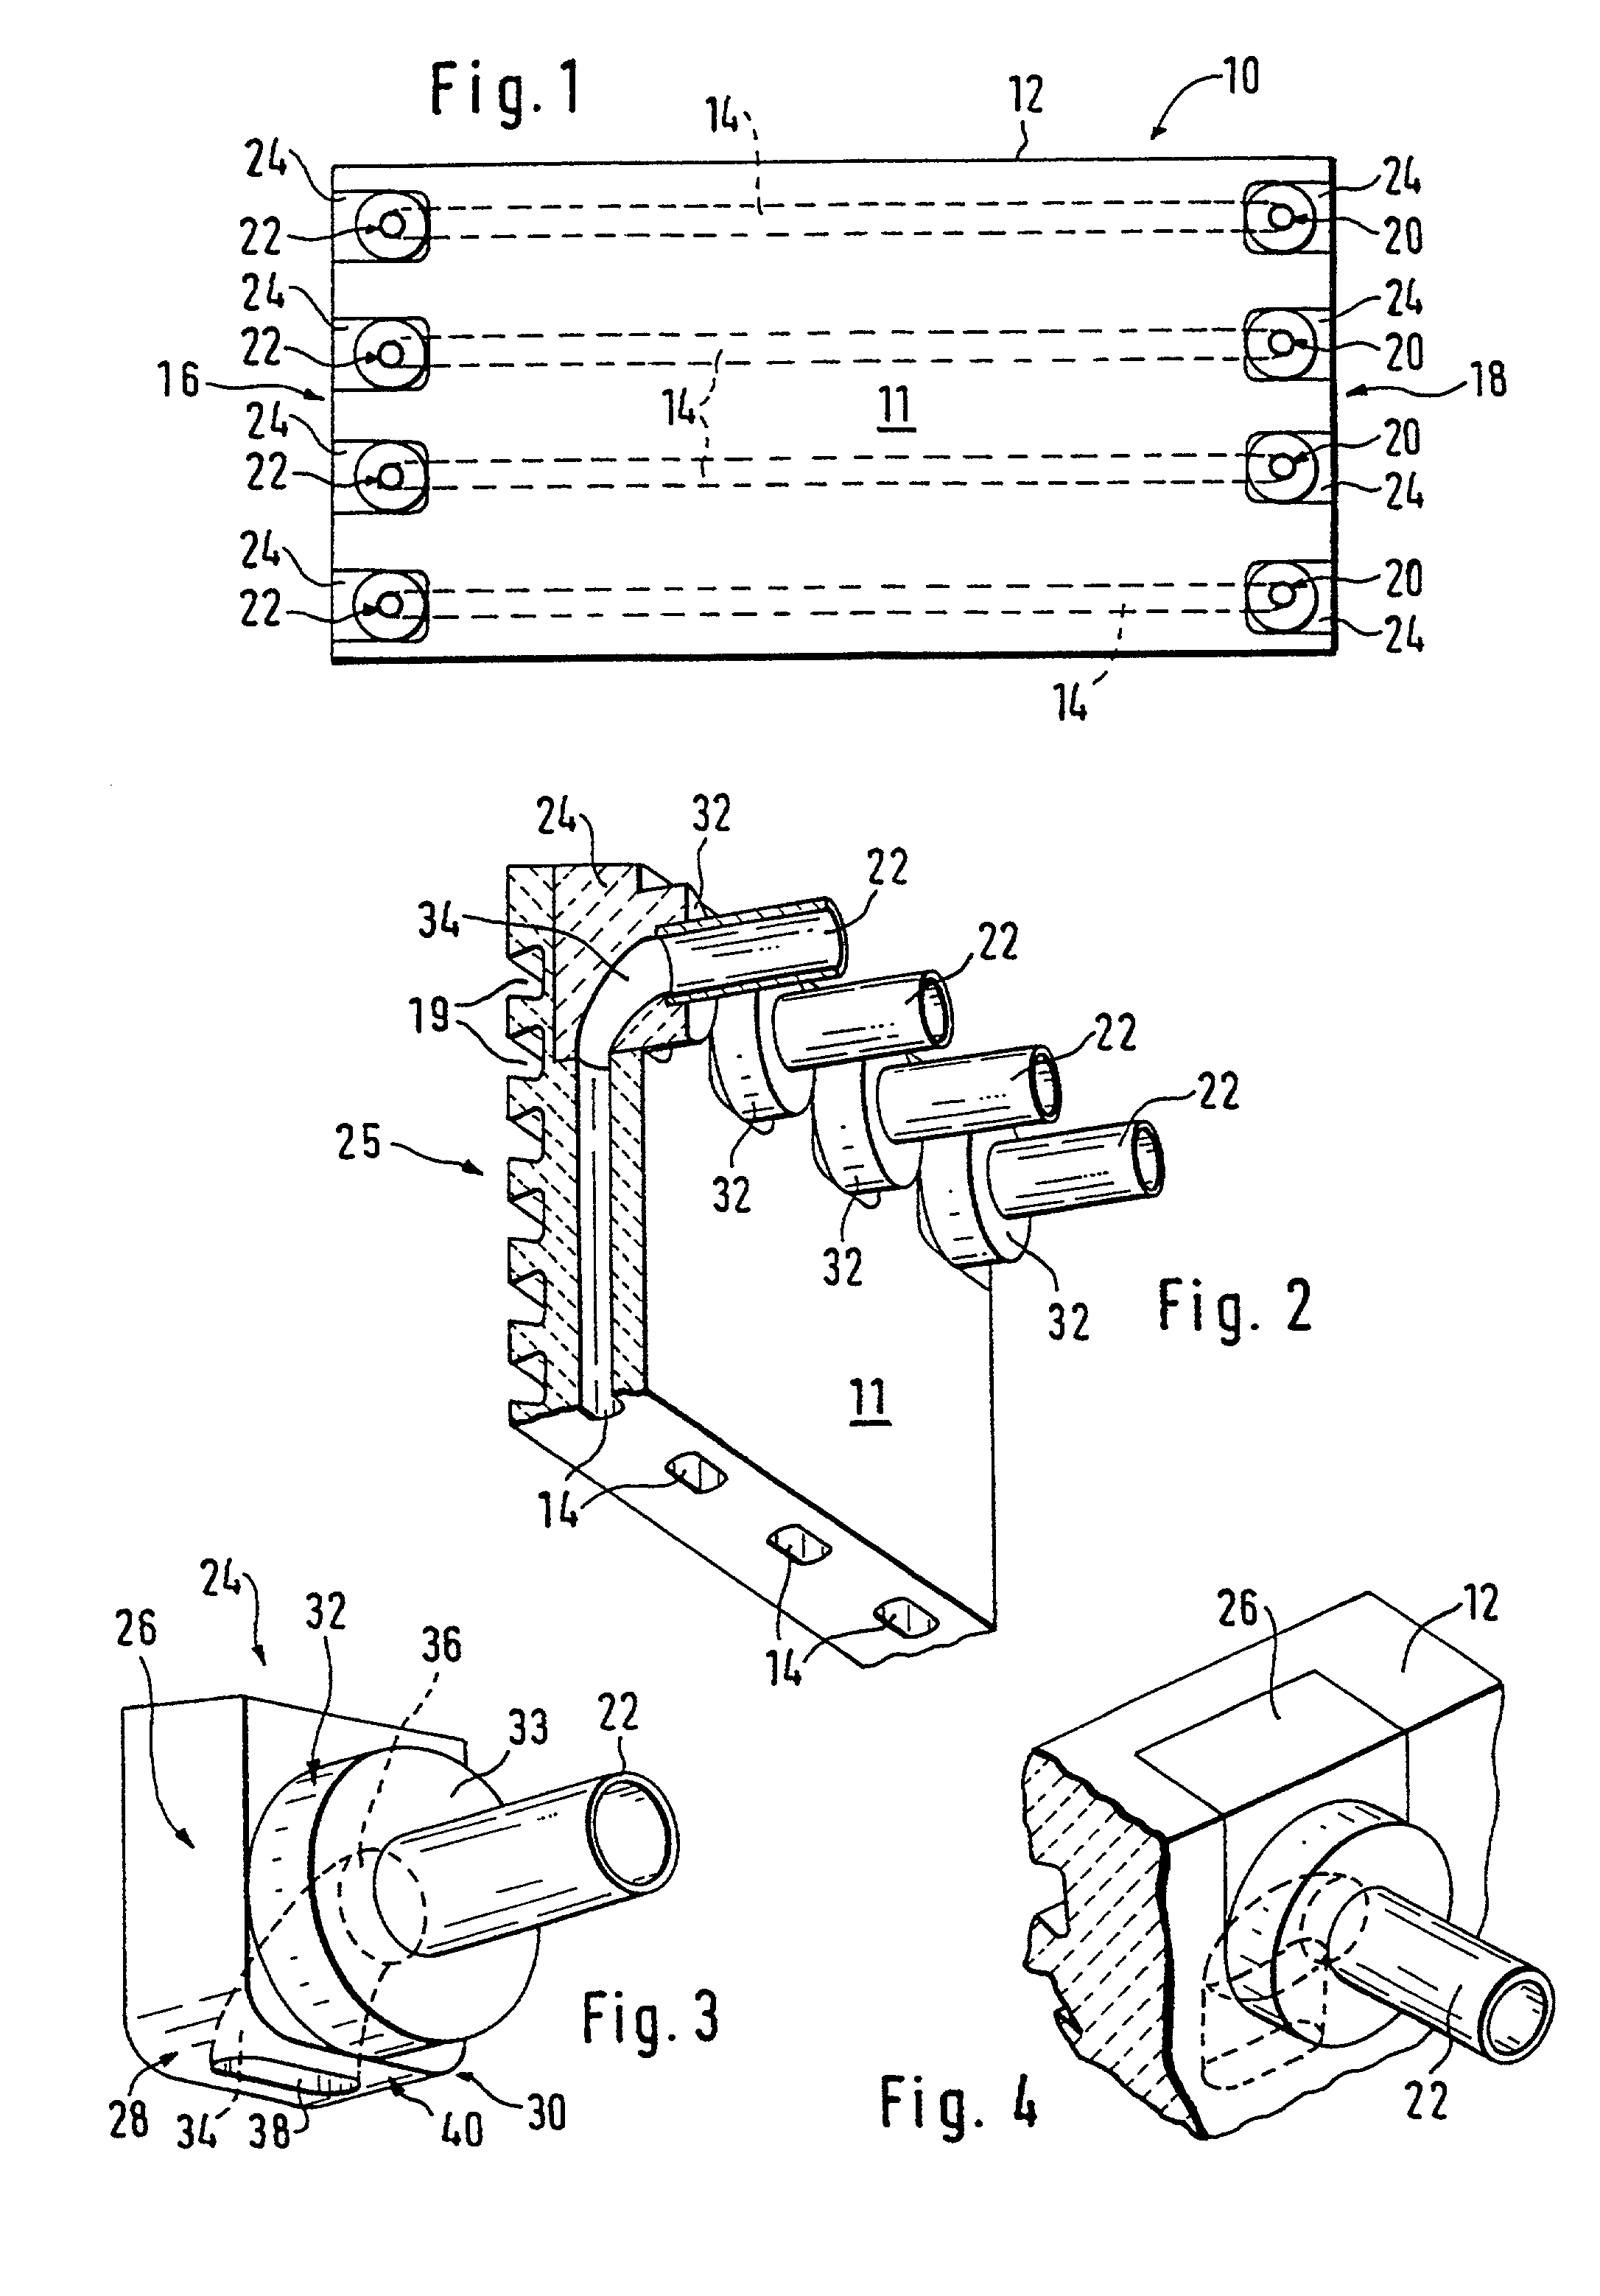 Cooling panel for a furnace for producing iron or steel